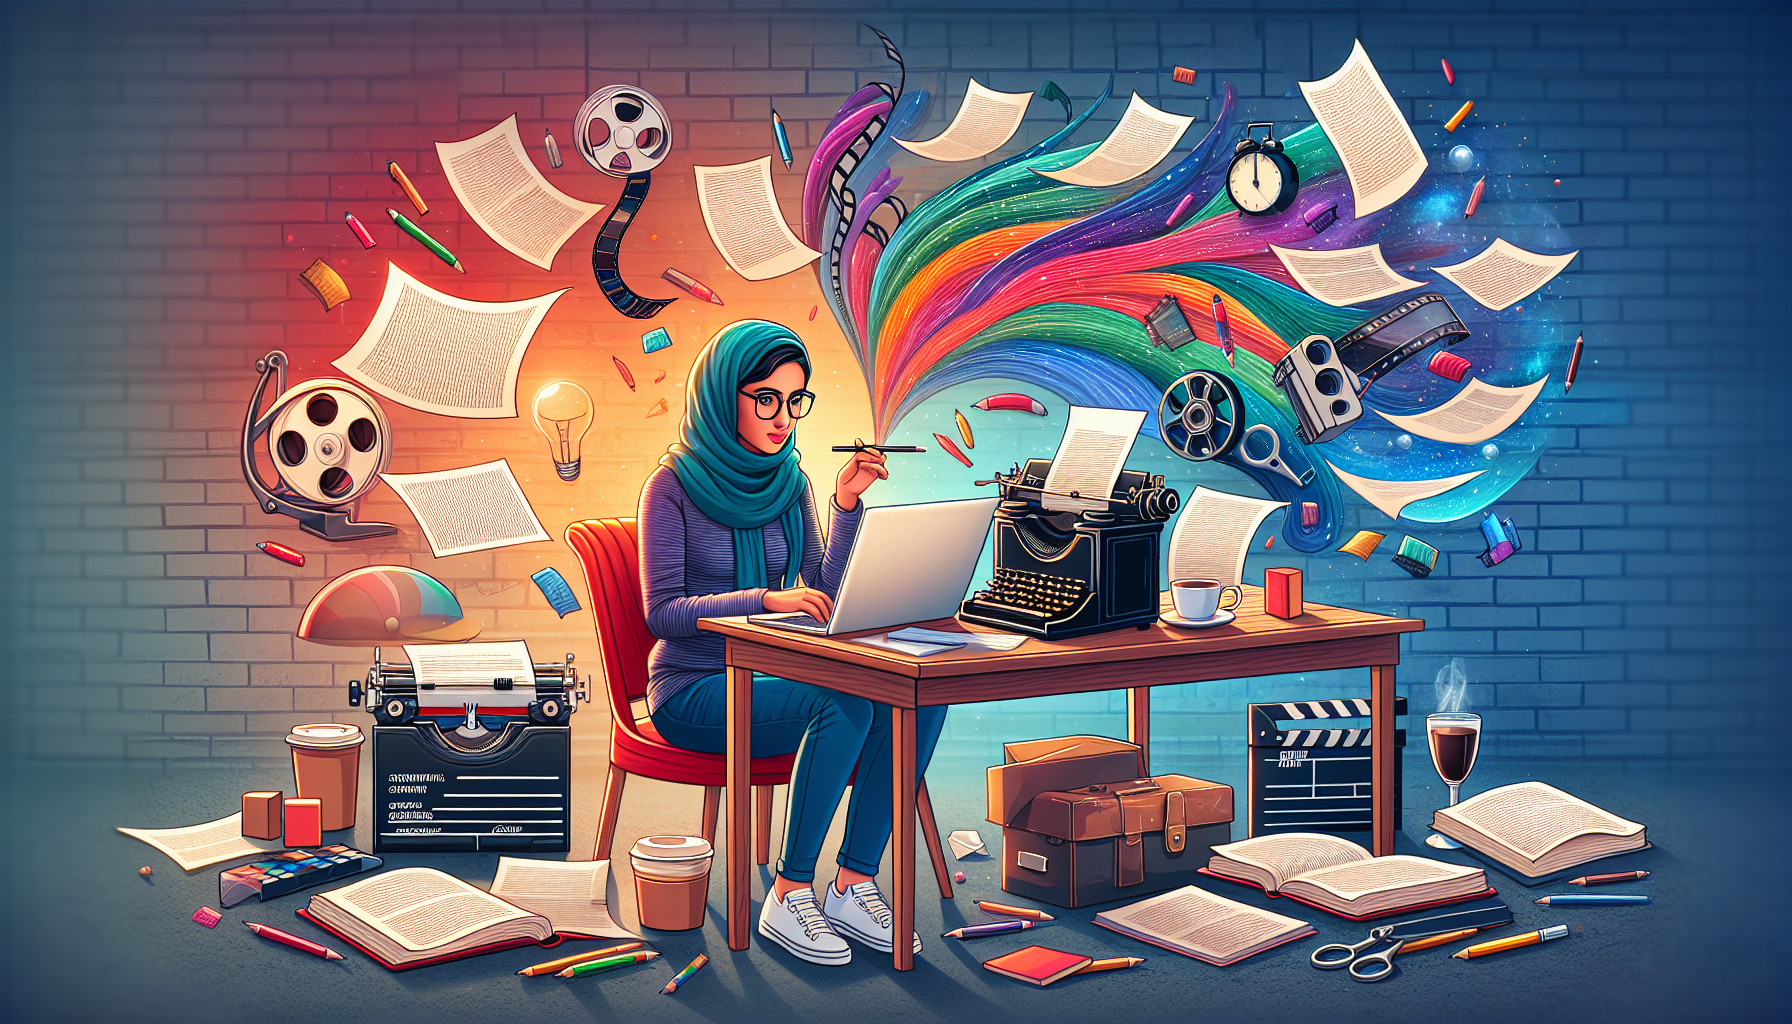 A modern and colorful illustration capturing the essence of a beginner's journey into the screenwriting industry. The scene may include a young Middle-Eastern woman sitting at a creative workspace, surrounded by scripts, a vintage typewriter, a glowing laptop, a film clapper, and a steaming cup of coffee. Alluding to creativity, the environment can be imbued with a rainbow of colors, including the paper and the burst of imaginative ideas represented as colorful wisps emanating from the screenplay. The illustration will be image only with no accompanying text.